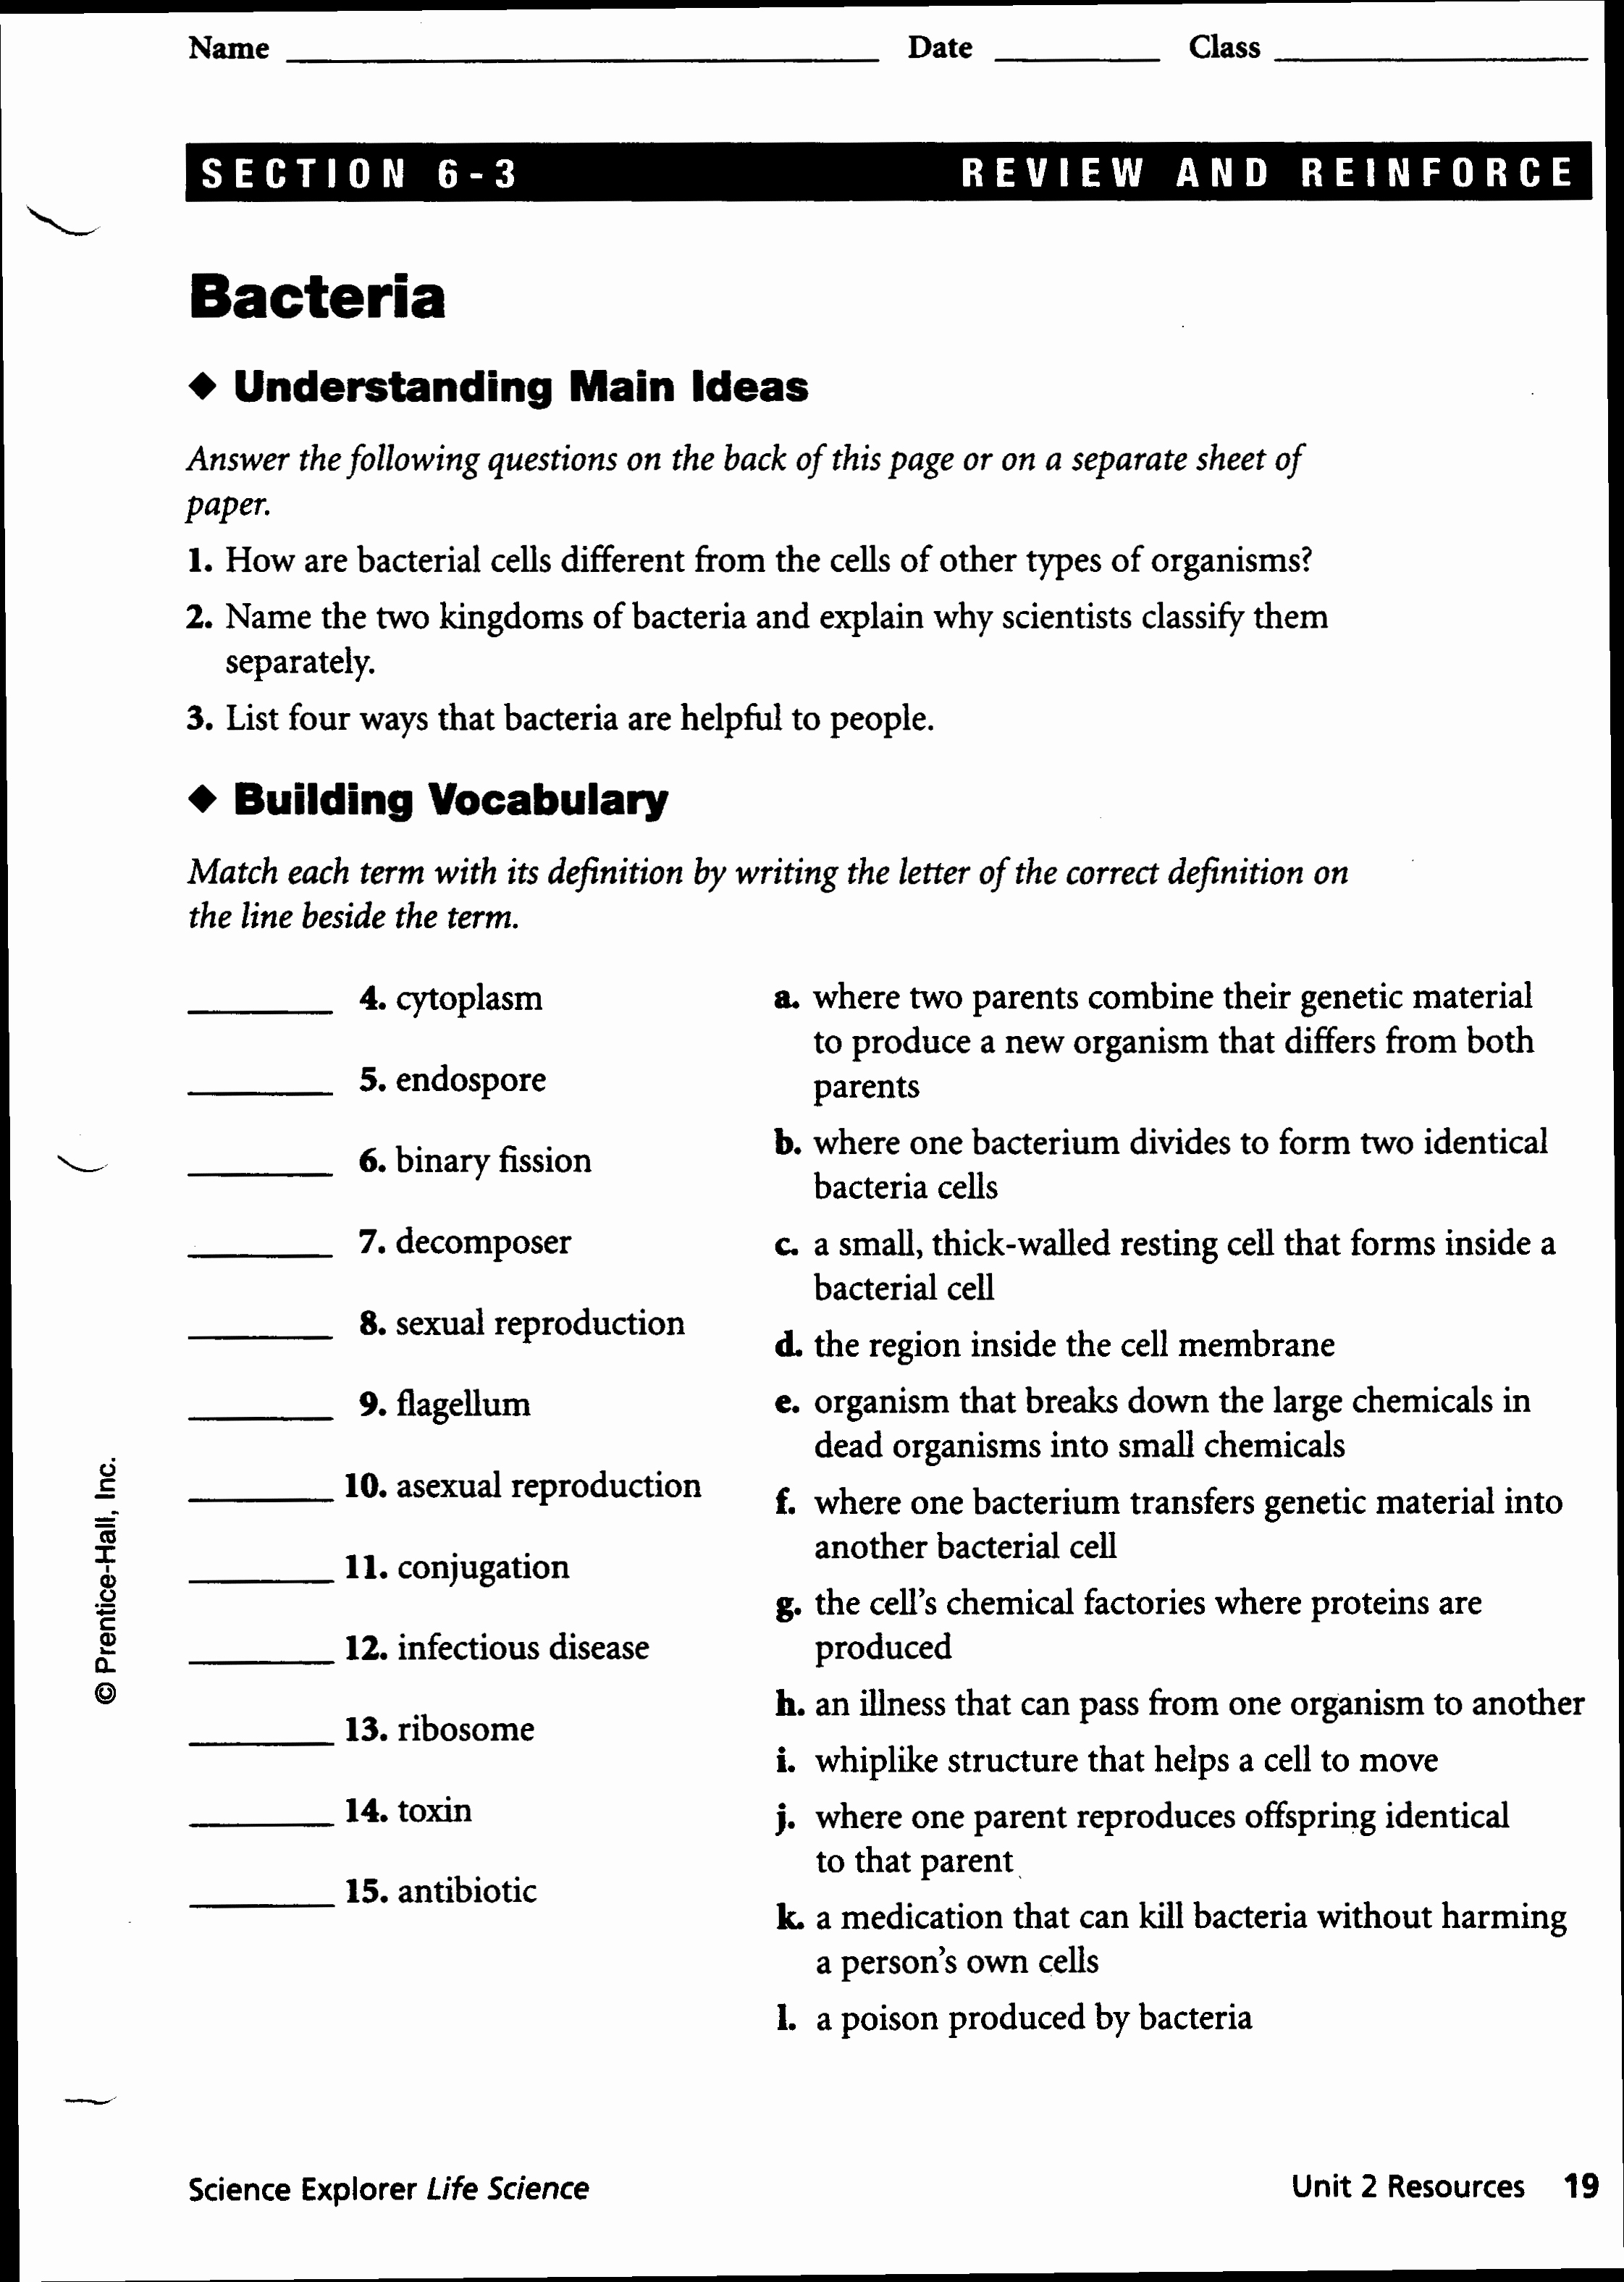 Virus and Bacteria Worksheet Answers Unique Worksheets Bacteria and Viruses Worksheet Worksheets